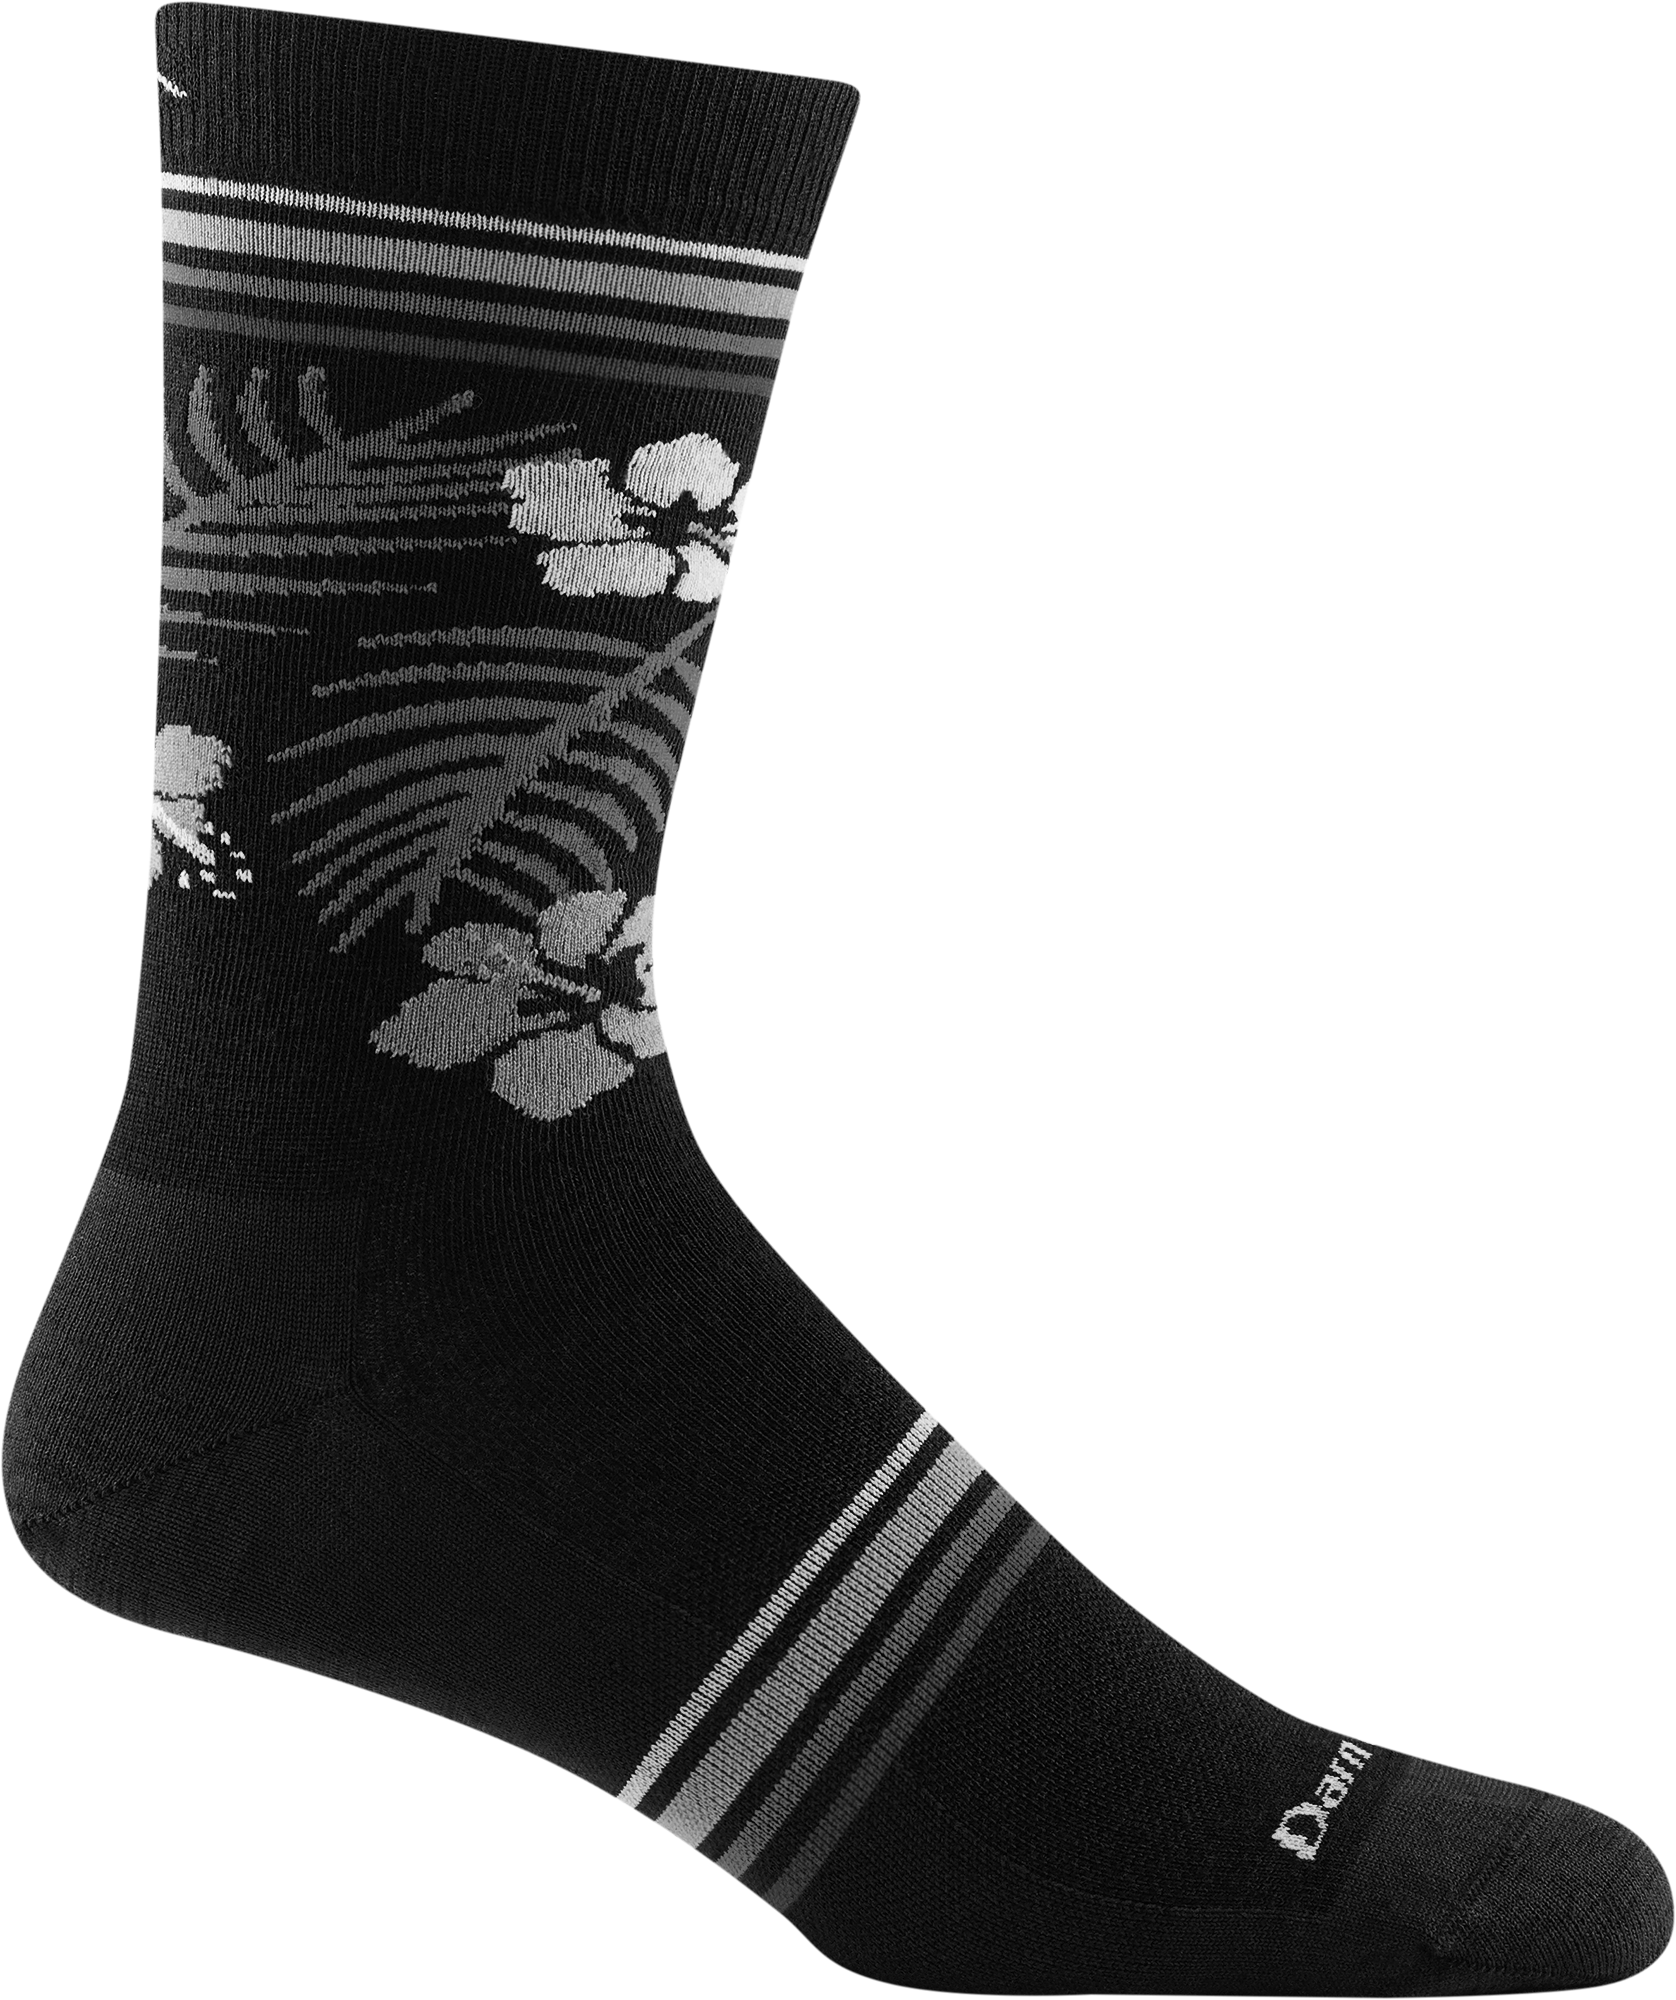 Cushion Location: Lifestyle socks with no cushion offer the standard feel for daily-use casual, and dress socks.. Cushion Weight: The lightweight yarns used in the Lifestyle category are designed for everyday use and feature a silky, low-profile feel.